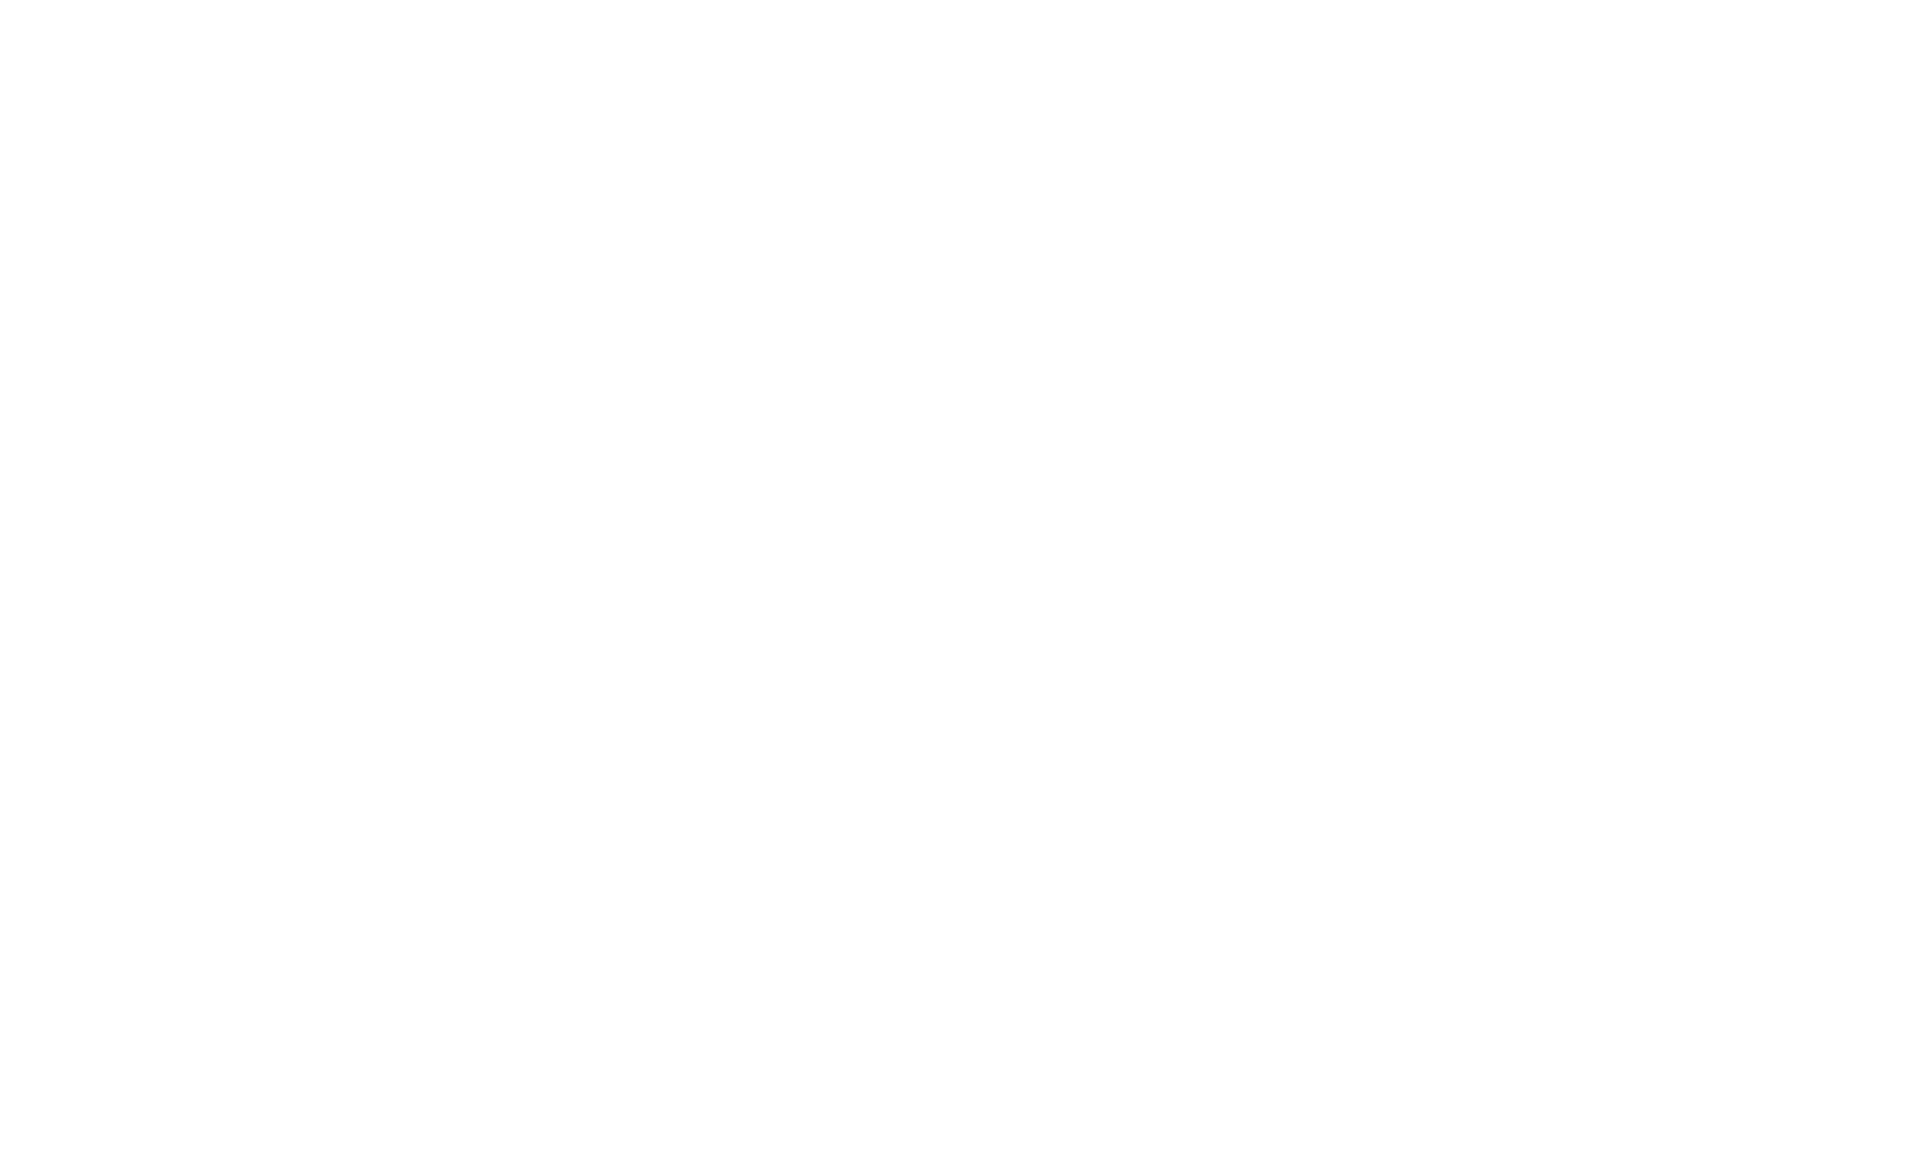 Urban Agriculture Month